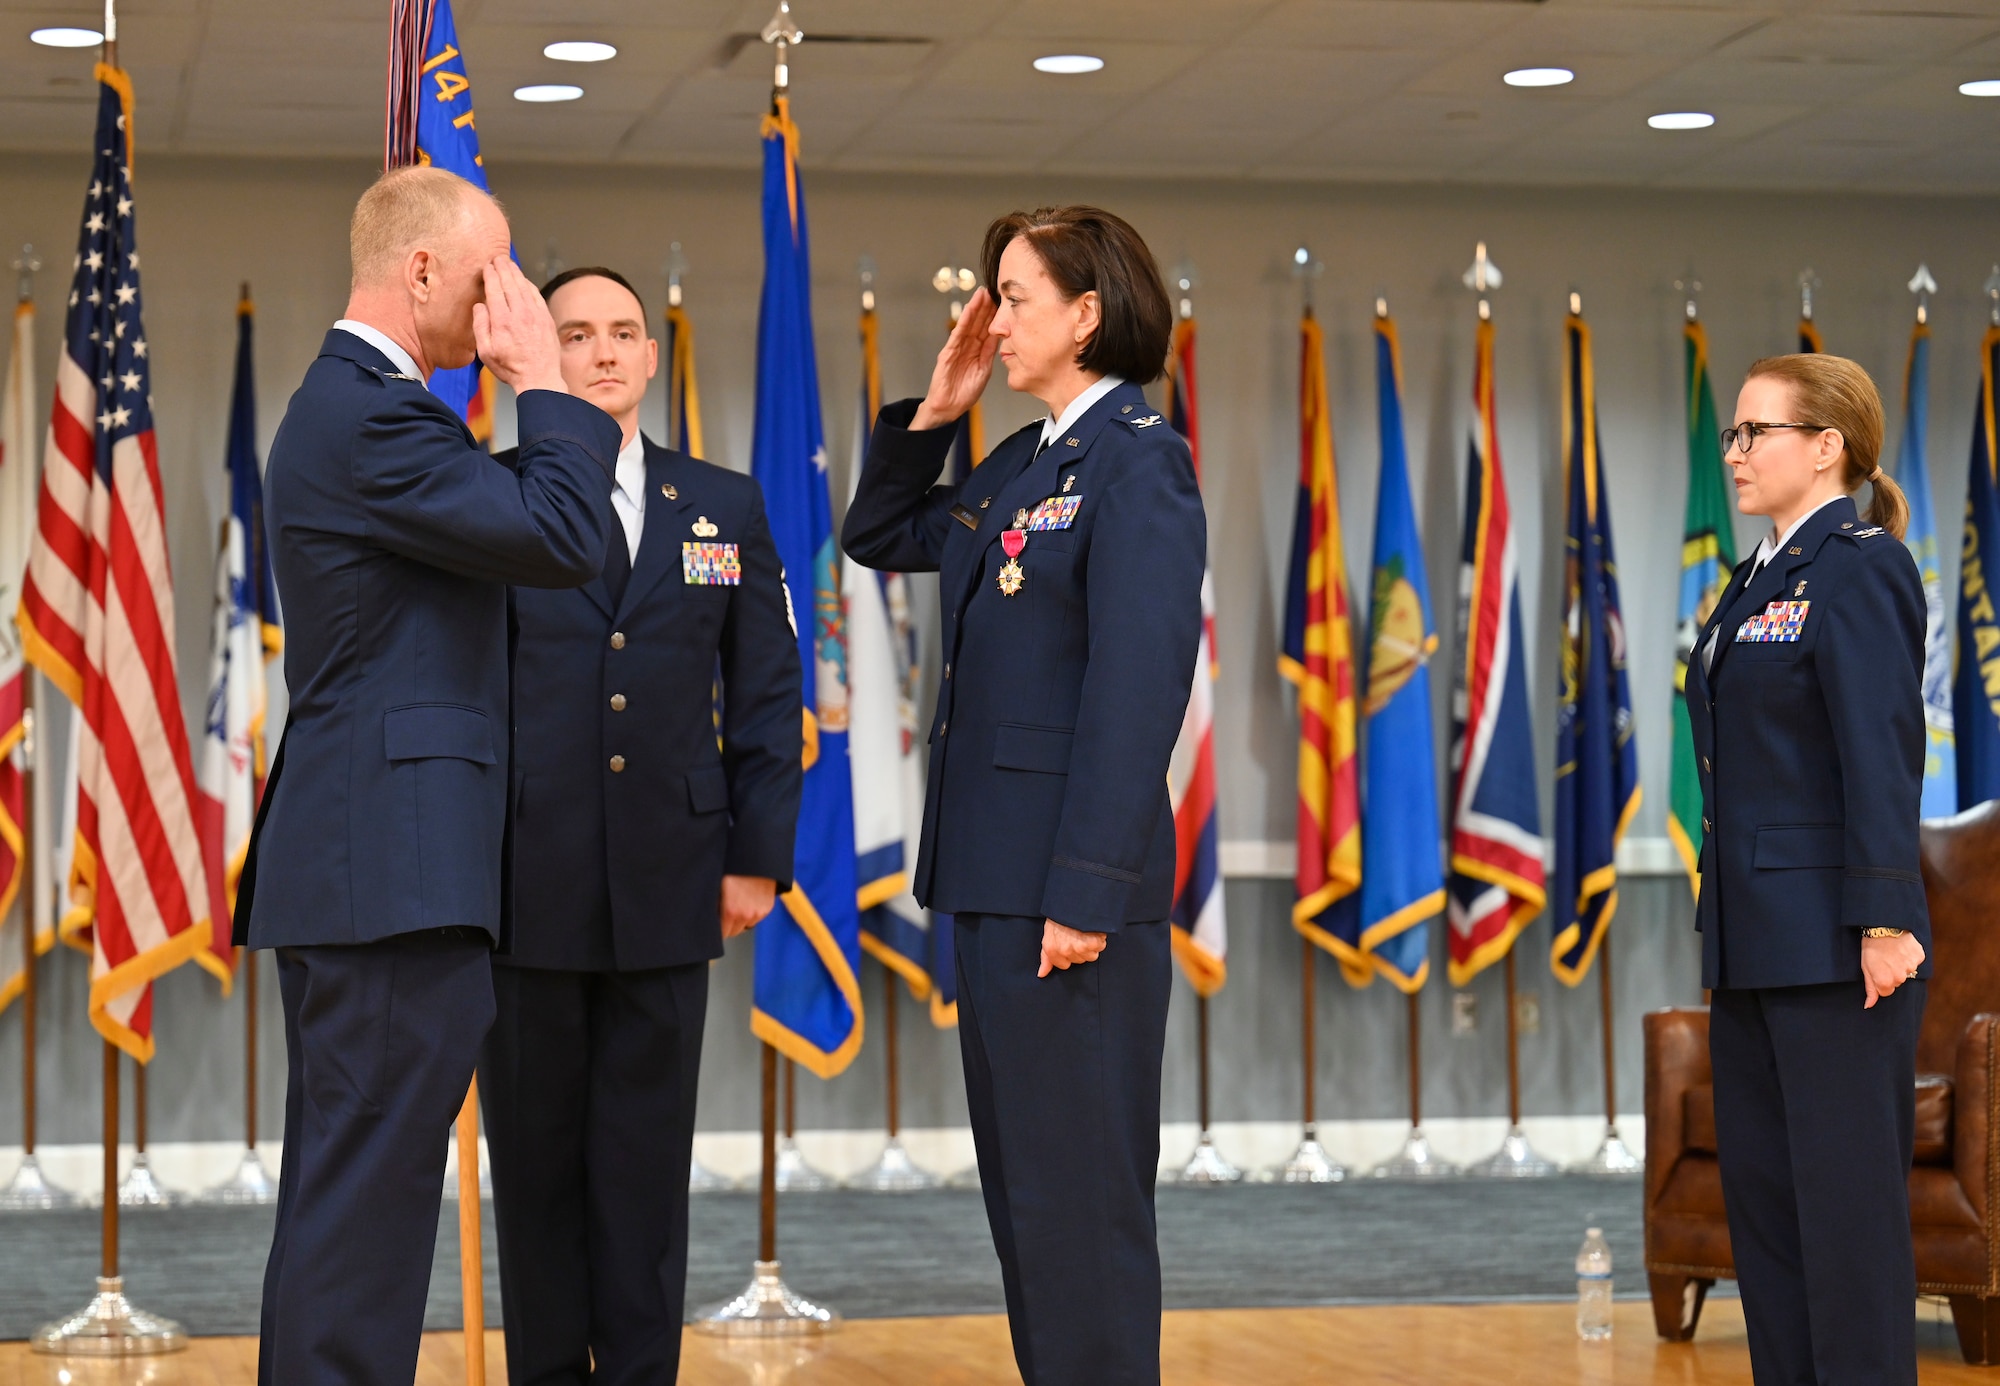 U.S. Air Force Col. Seth Graham, 14th Flying Training Wing commander, returns a salute to Col. Betty Venth, out-going 14th Medical Group commander, after presenting her with the Legion of Merit, during a Change of Command ceremony, July 6, 2021, on Columbus Air Force Base, Miss. The Legion of Merit is awarded to service members in key positions or responsibility for exceptionally meritorious conduct in the performance of outstanding serviced and achievements. (U.S. Air Force photo by Airman 1st Class Jessica Haynie)